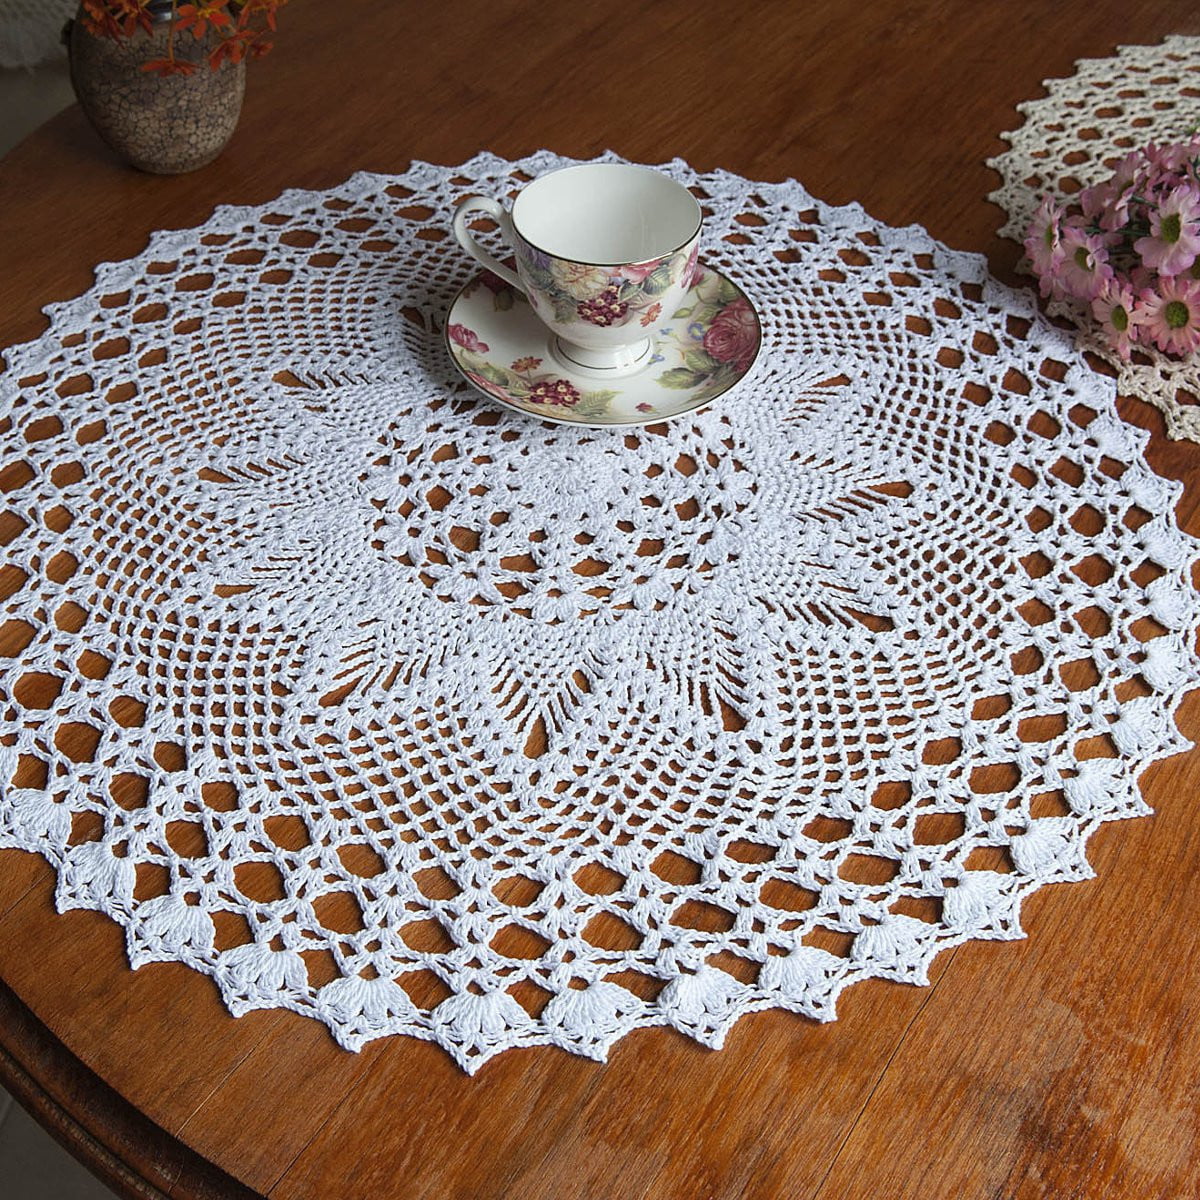 White Vintage Hand Crochet Doily Round Lace Table Topper Flower Tablecloth 20"